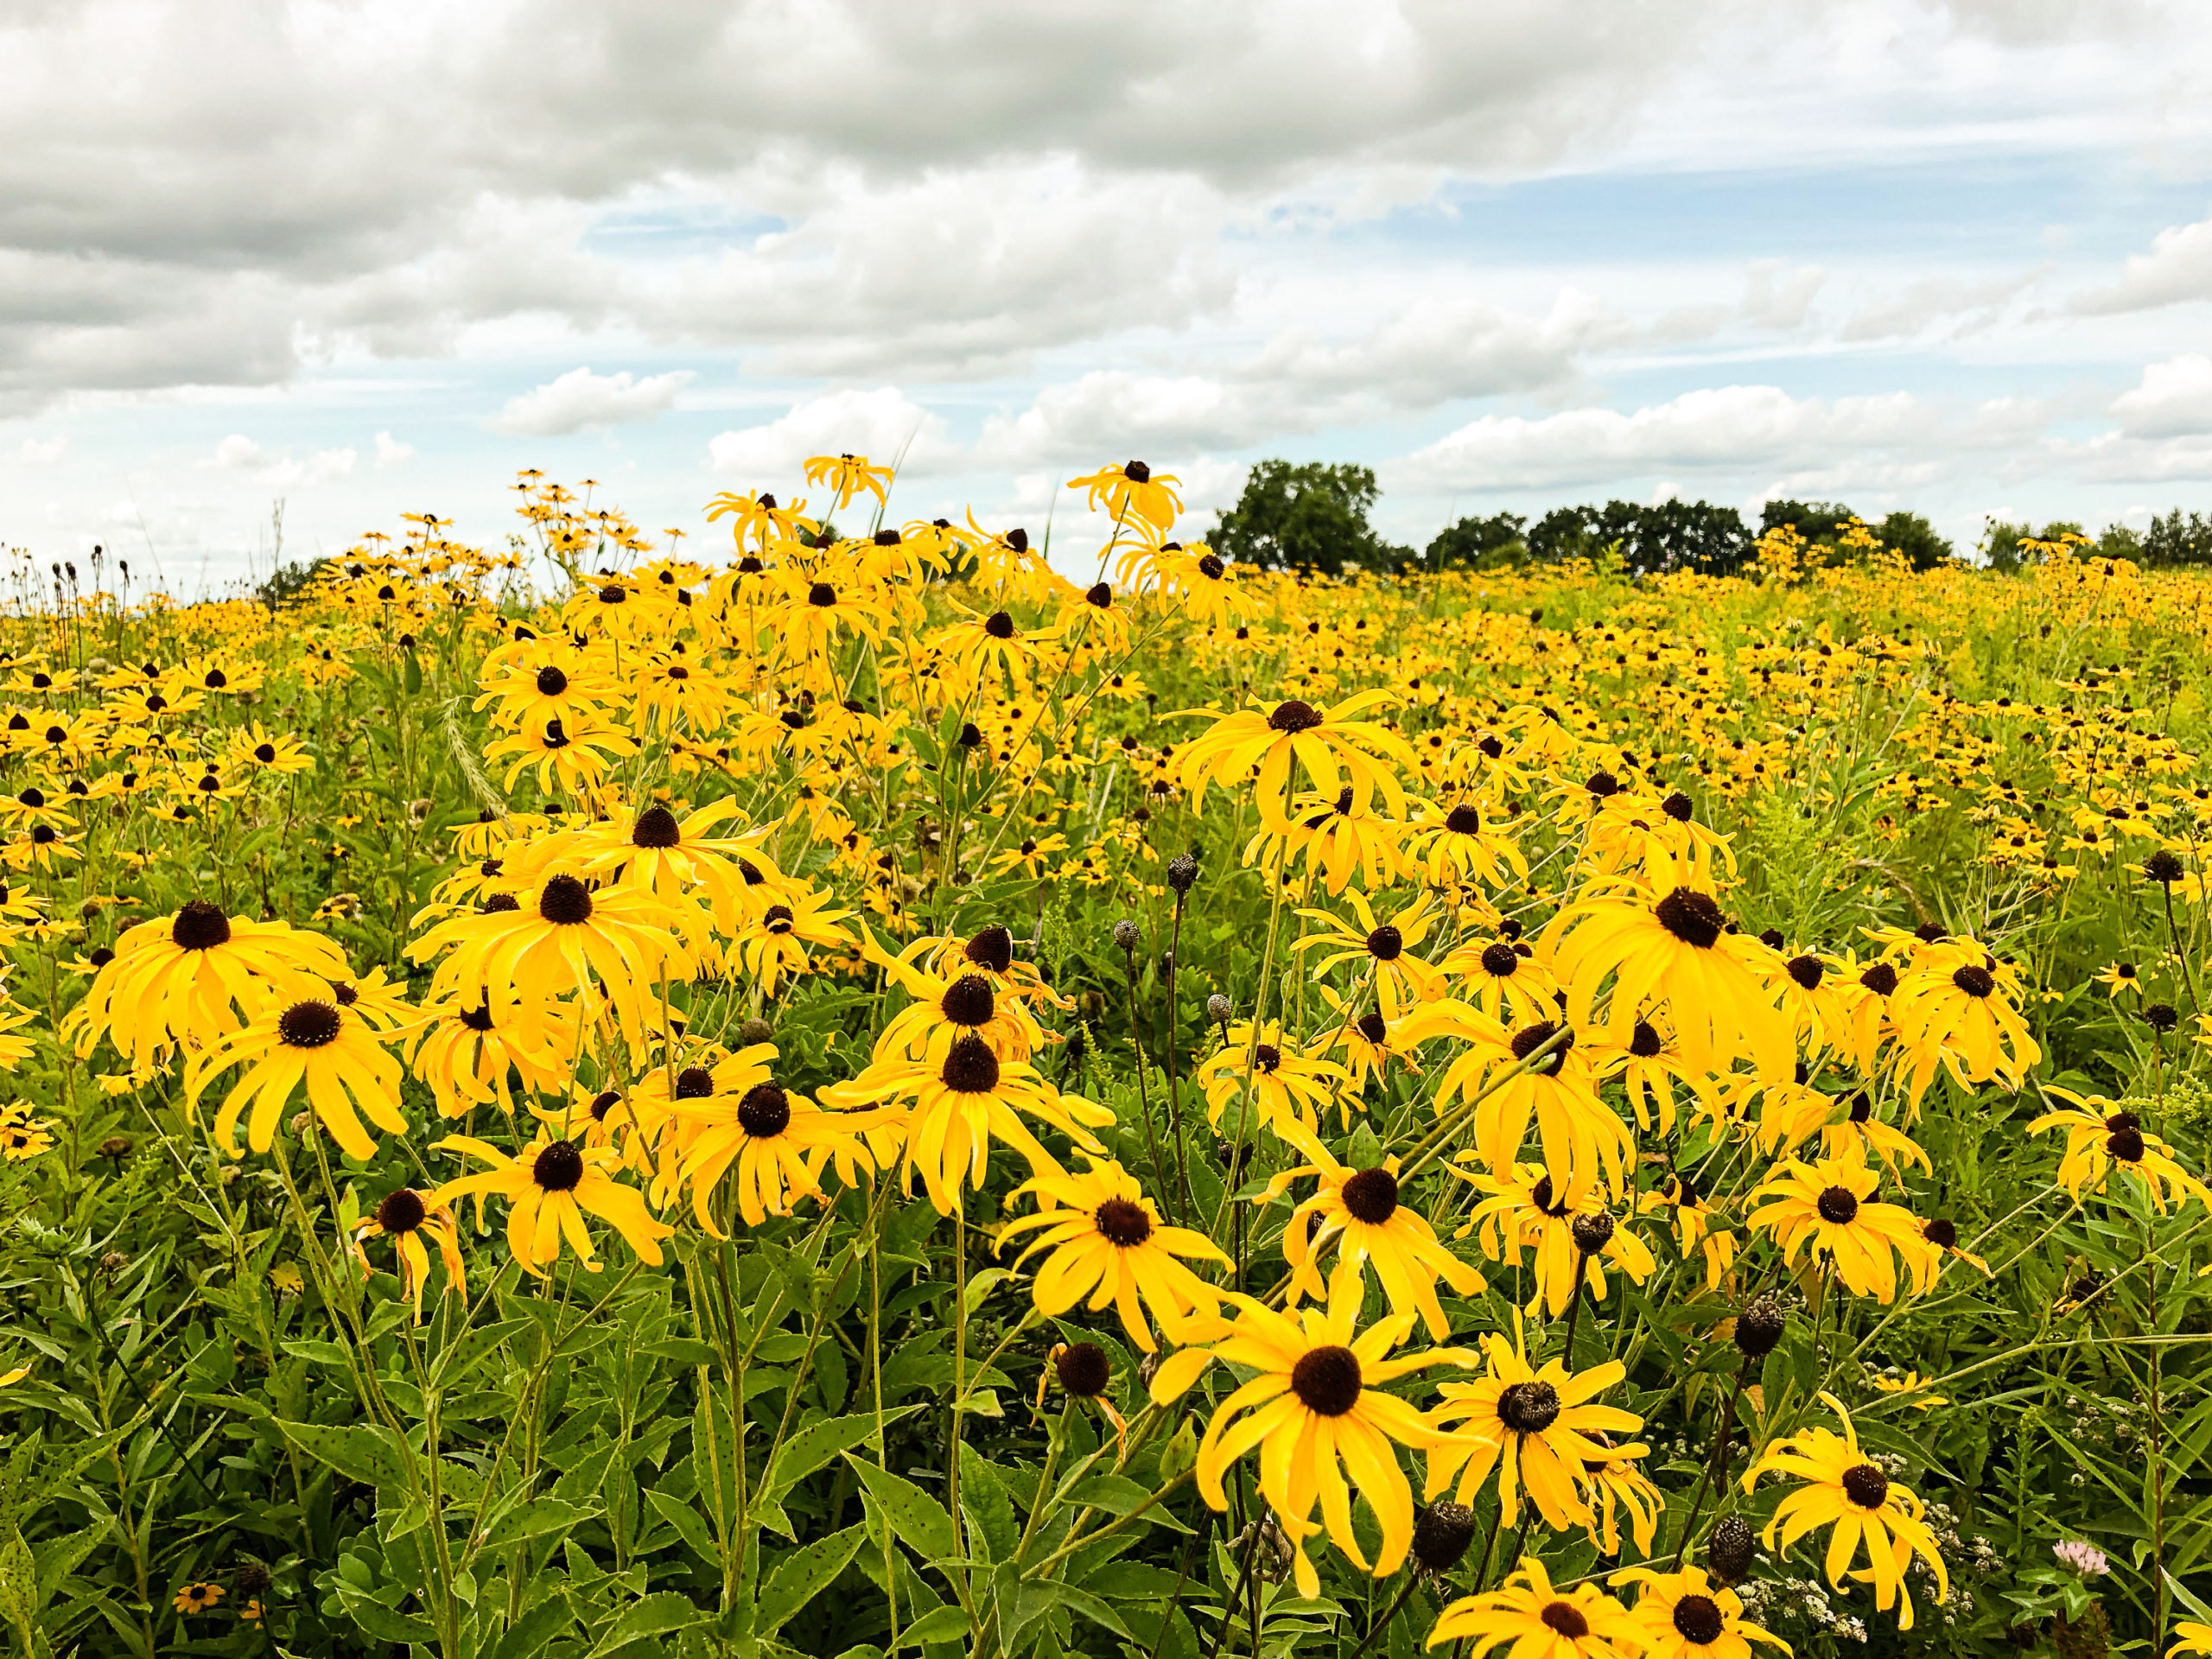 Ice Age Trail Alliance, Ice Age National Scenic Trail, Table Bluff Segment, Rudbeckia, Black-eyed Susasn, Bloom, Summer